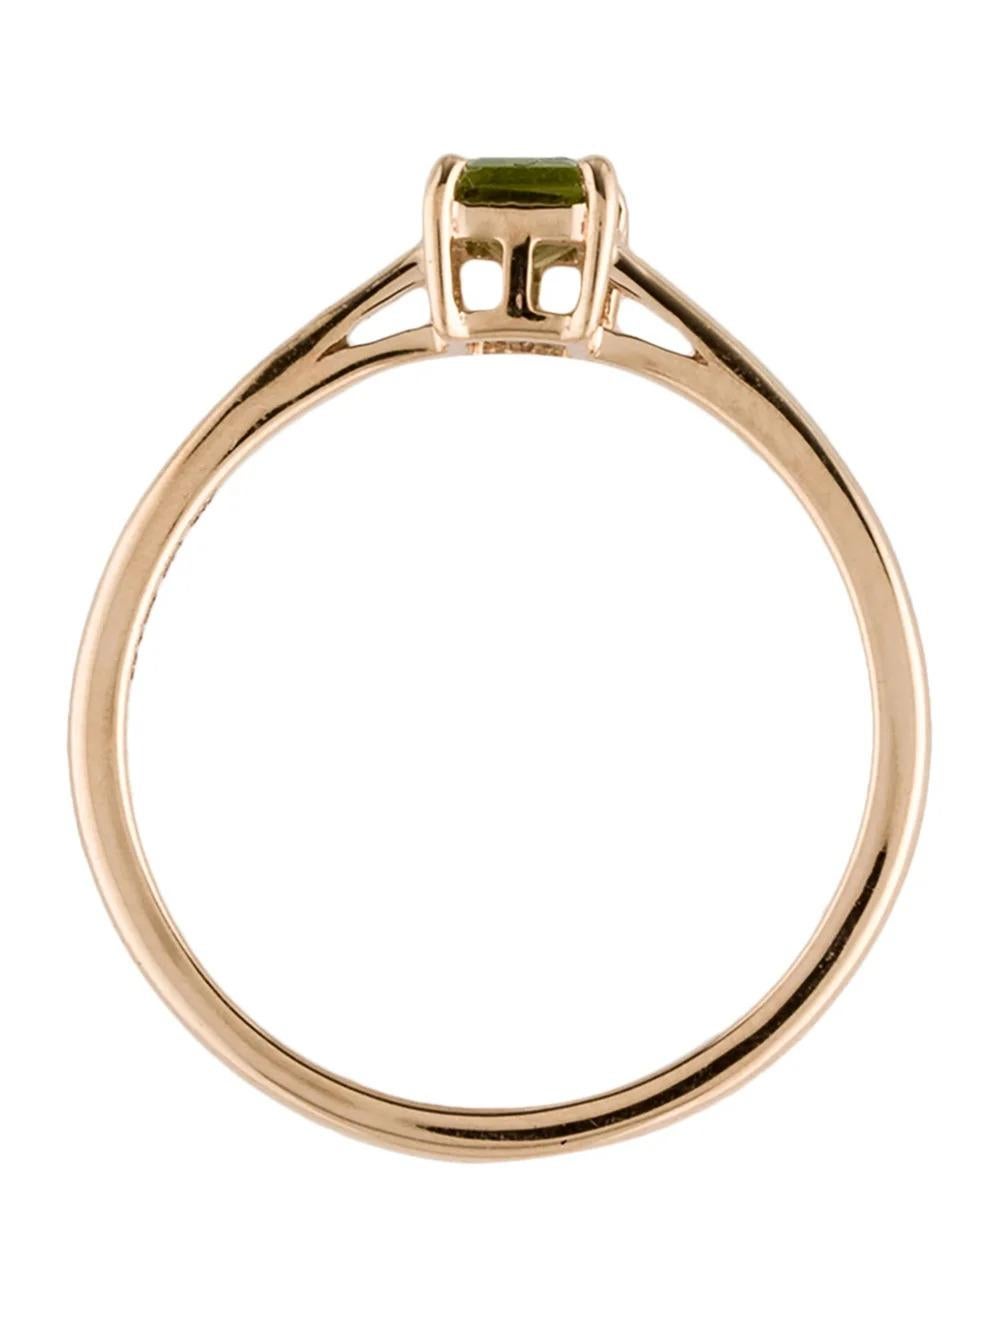 Women's 14K Peridot Cocktail Ring Size 6.75 - Green Gemstone, Statement Jewelry For Sale